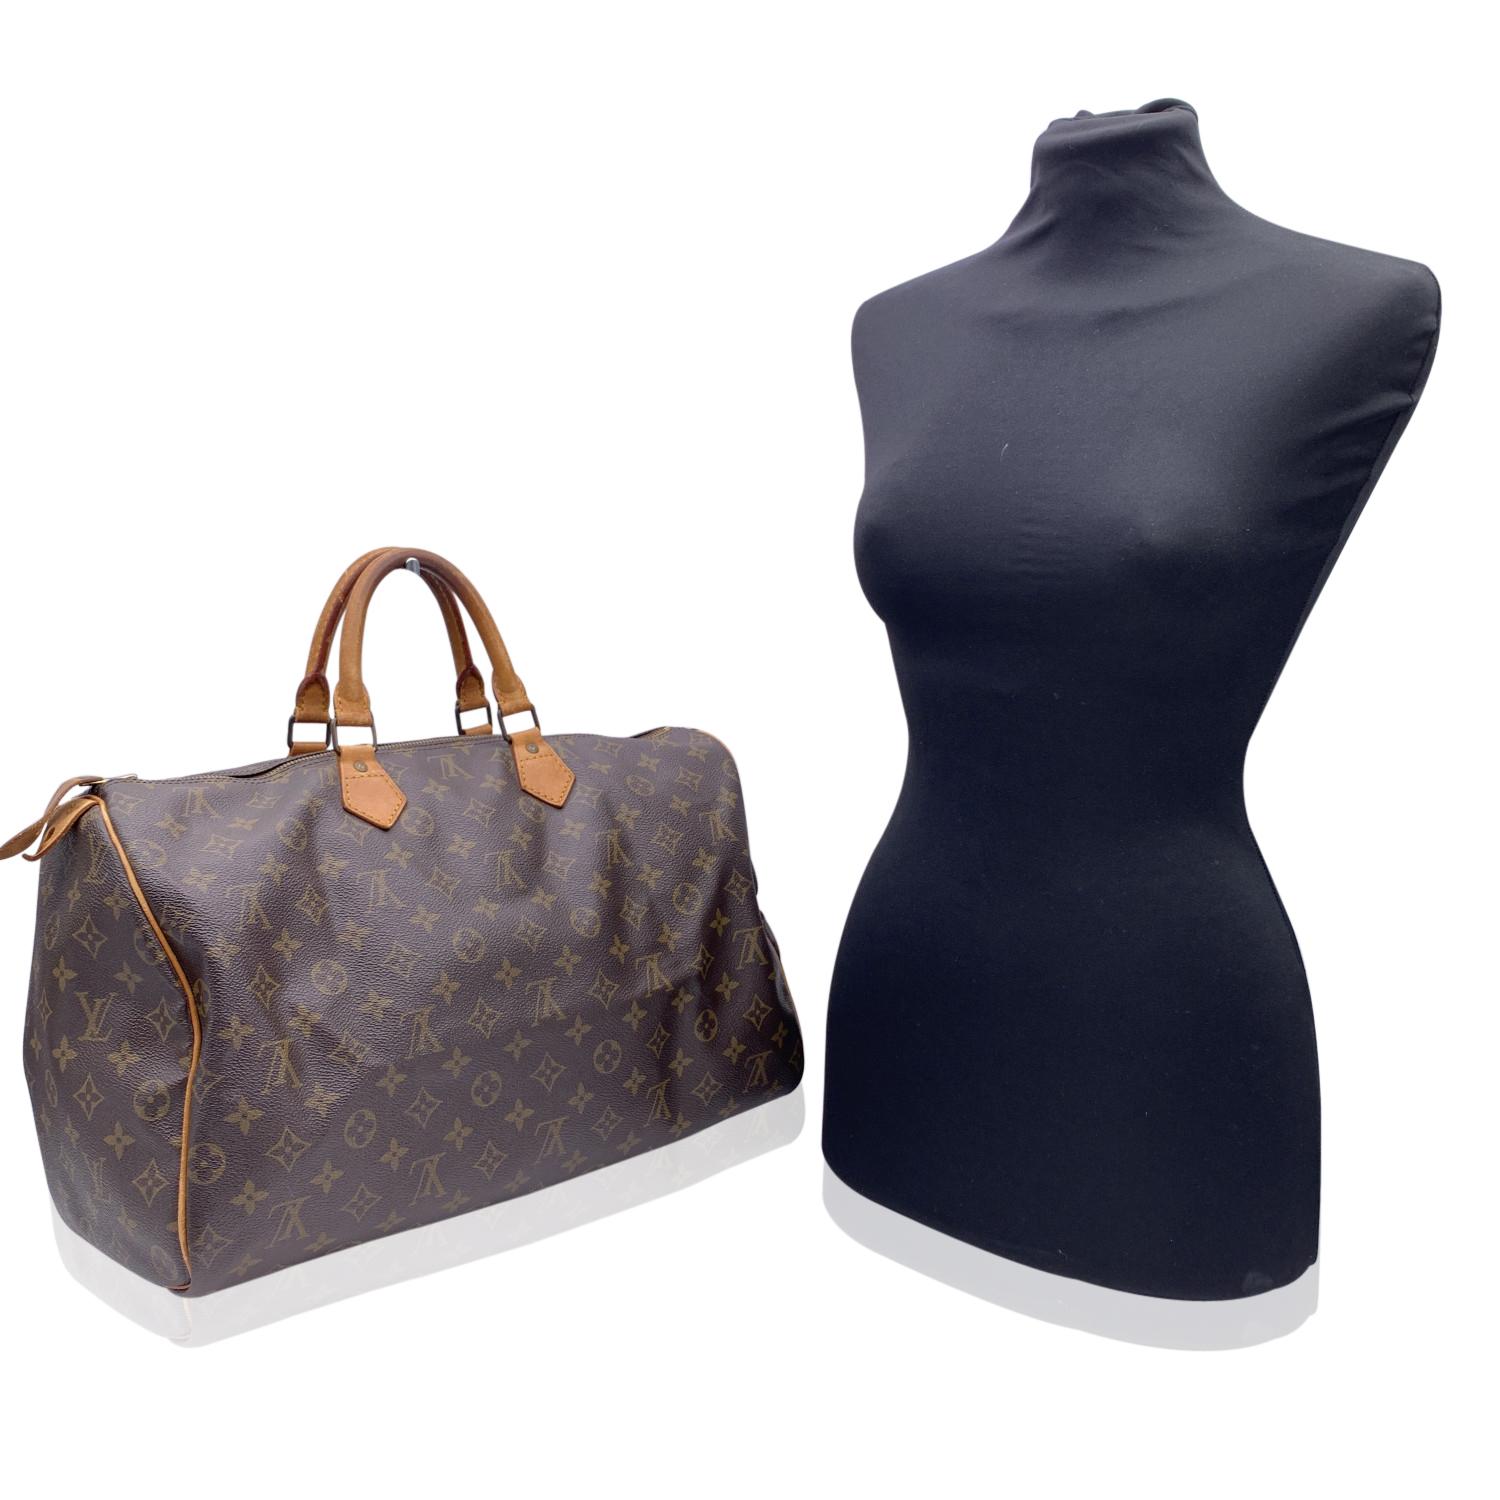 This classic Louis Vuitton SPEEDY 40, one of the most popular lines in the LV monogram. Upper zipper closure. Brown fabric lining. 1 side open pocket inside. Natural leather handles and piping. LV - LOUIS VUITTON monograms on canvas ,'LOUIS VUITTON